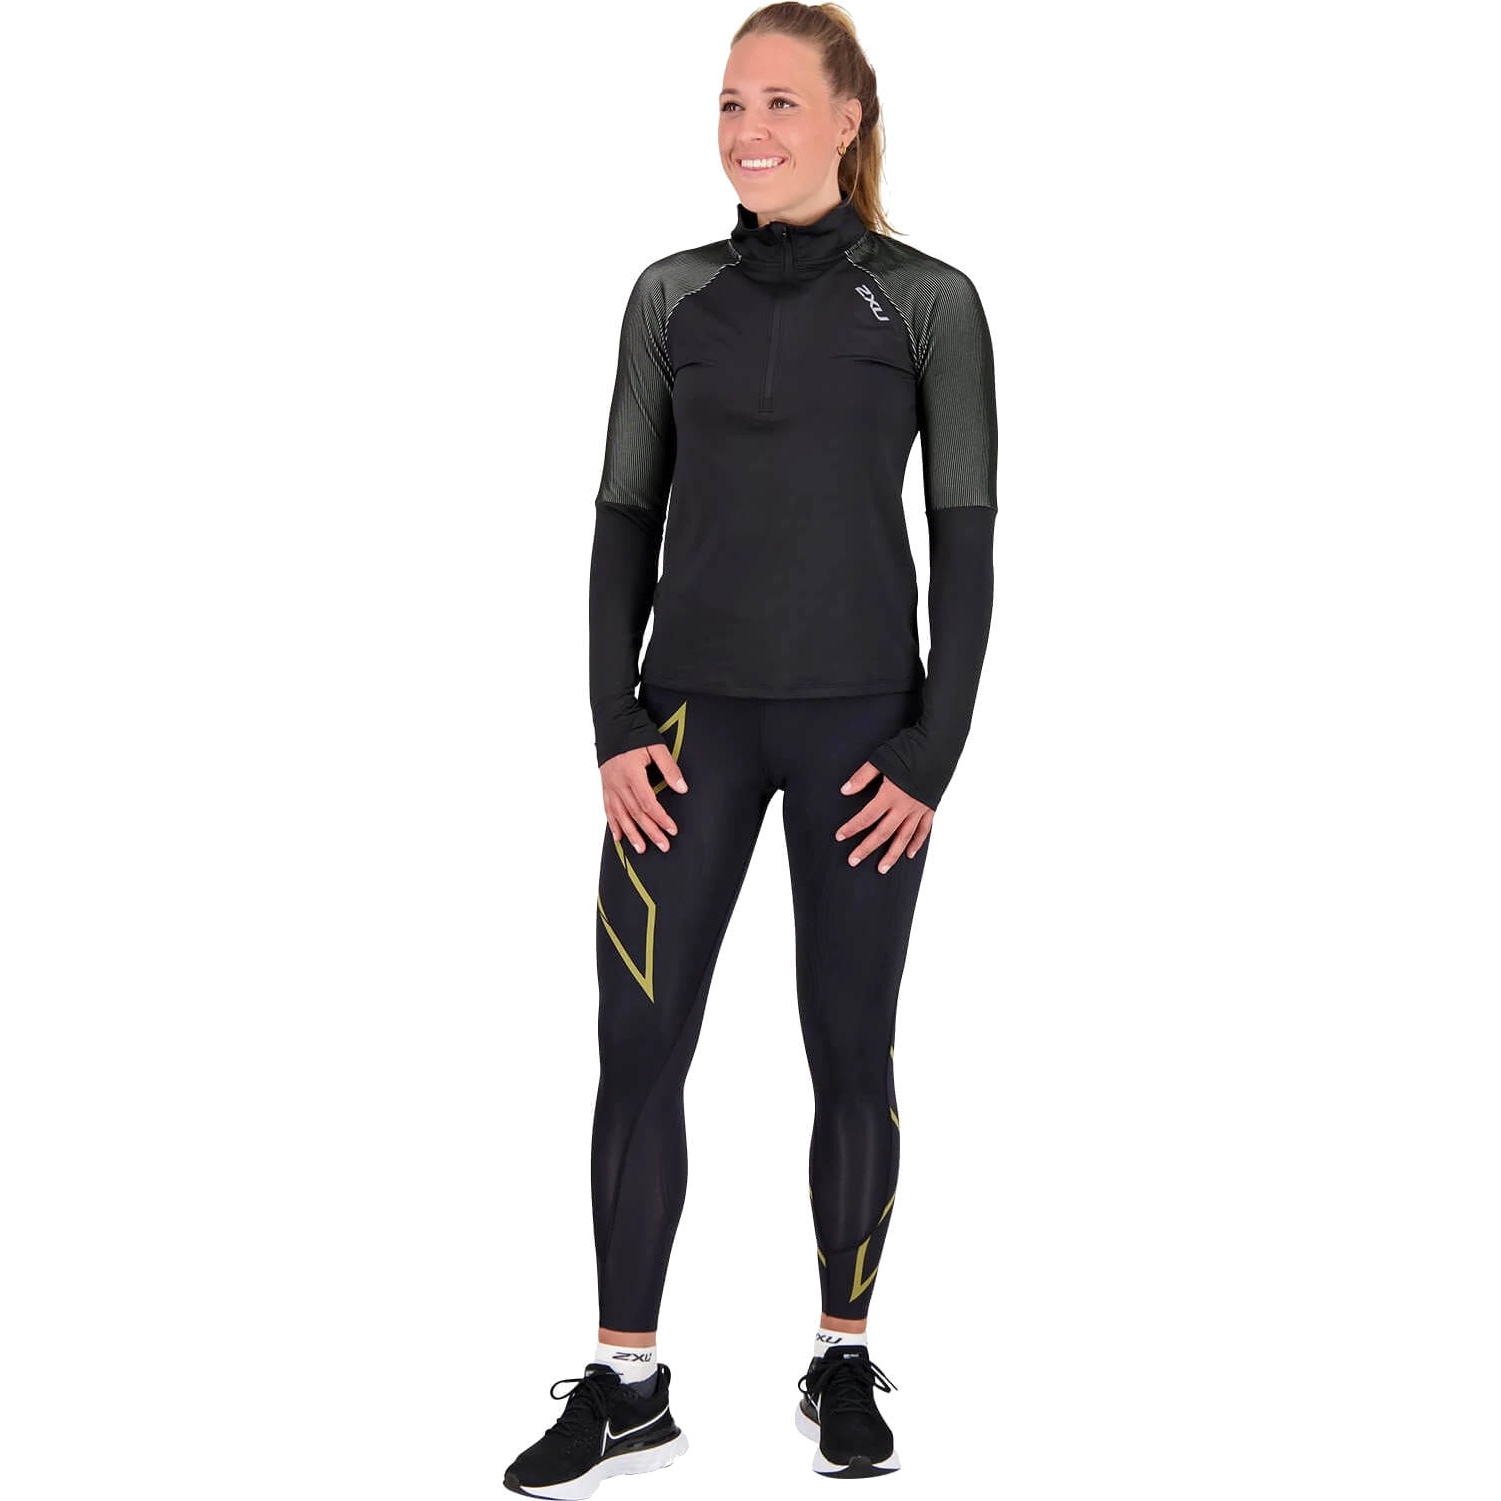 SKINS Women's A400 Compression Long Tights, Black/Gold, X-Large